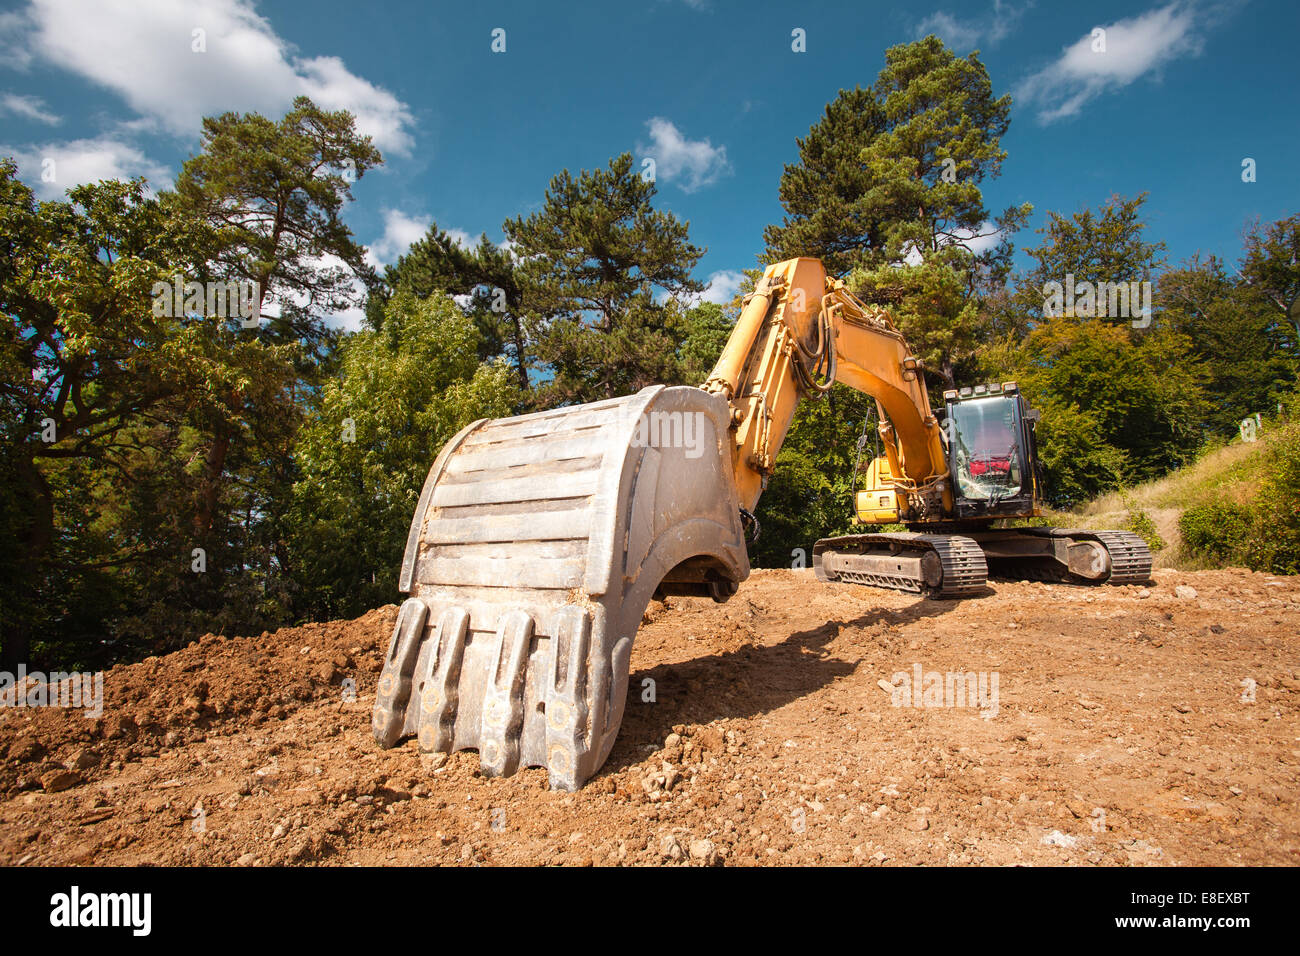 perspective view of excavator on new construction site with trees and blue sky in background Stock Photo